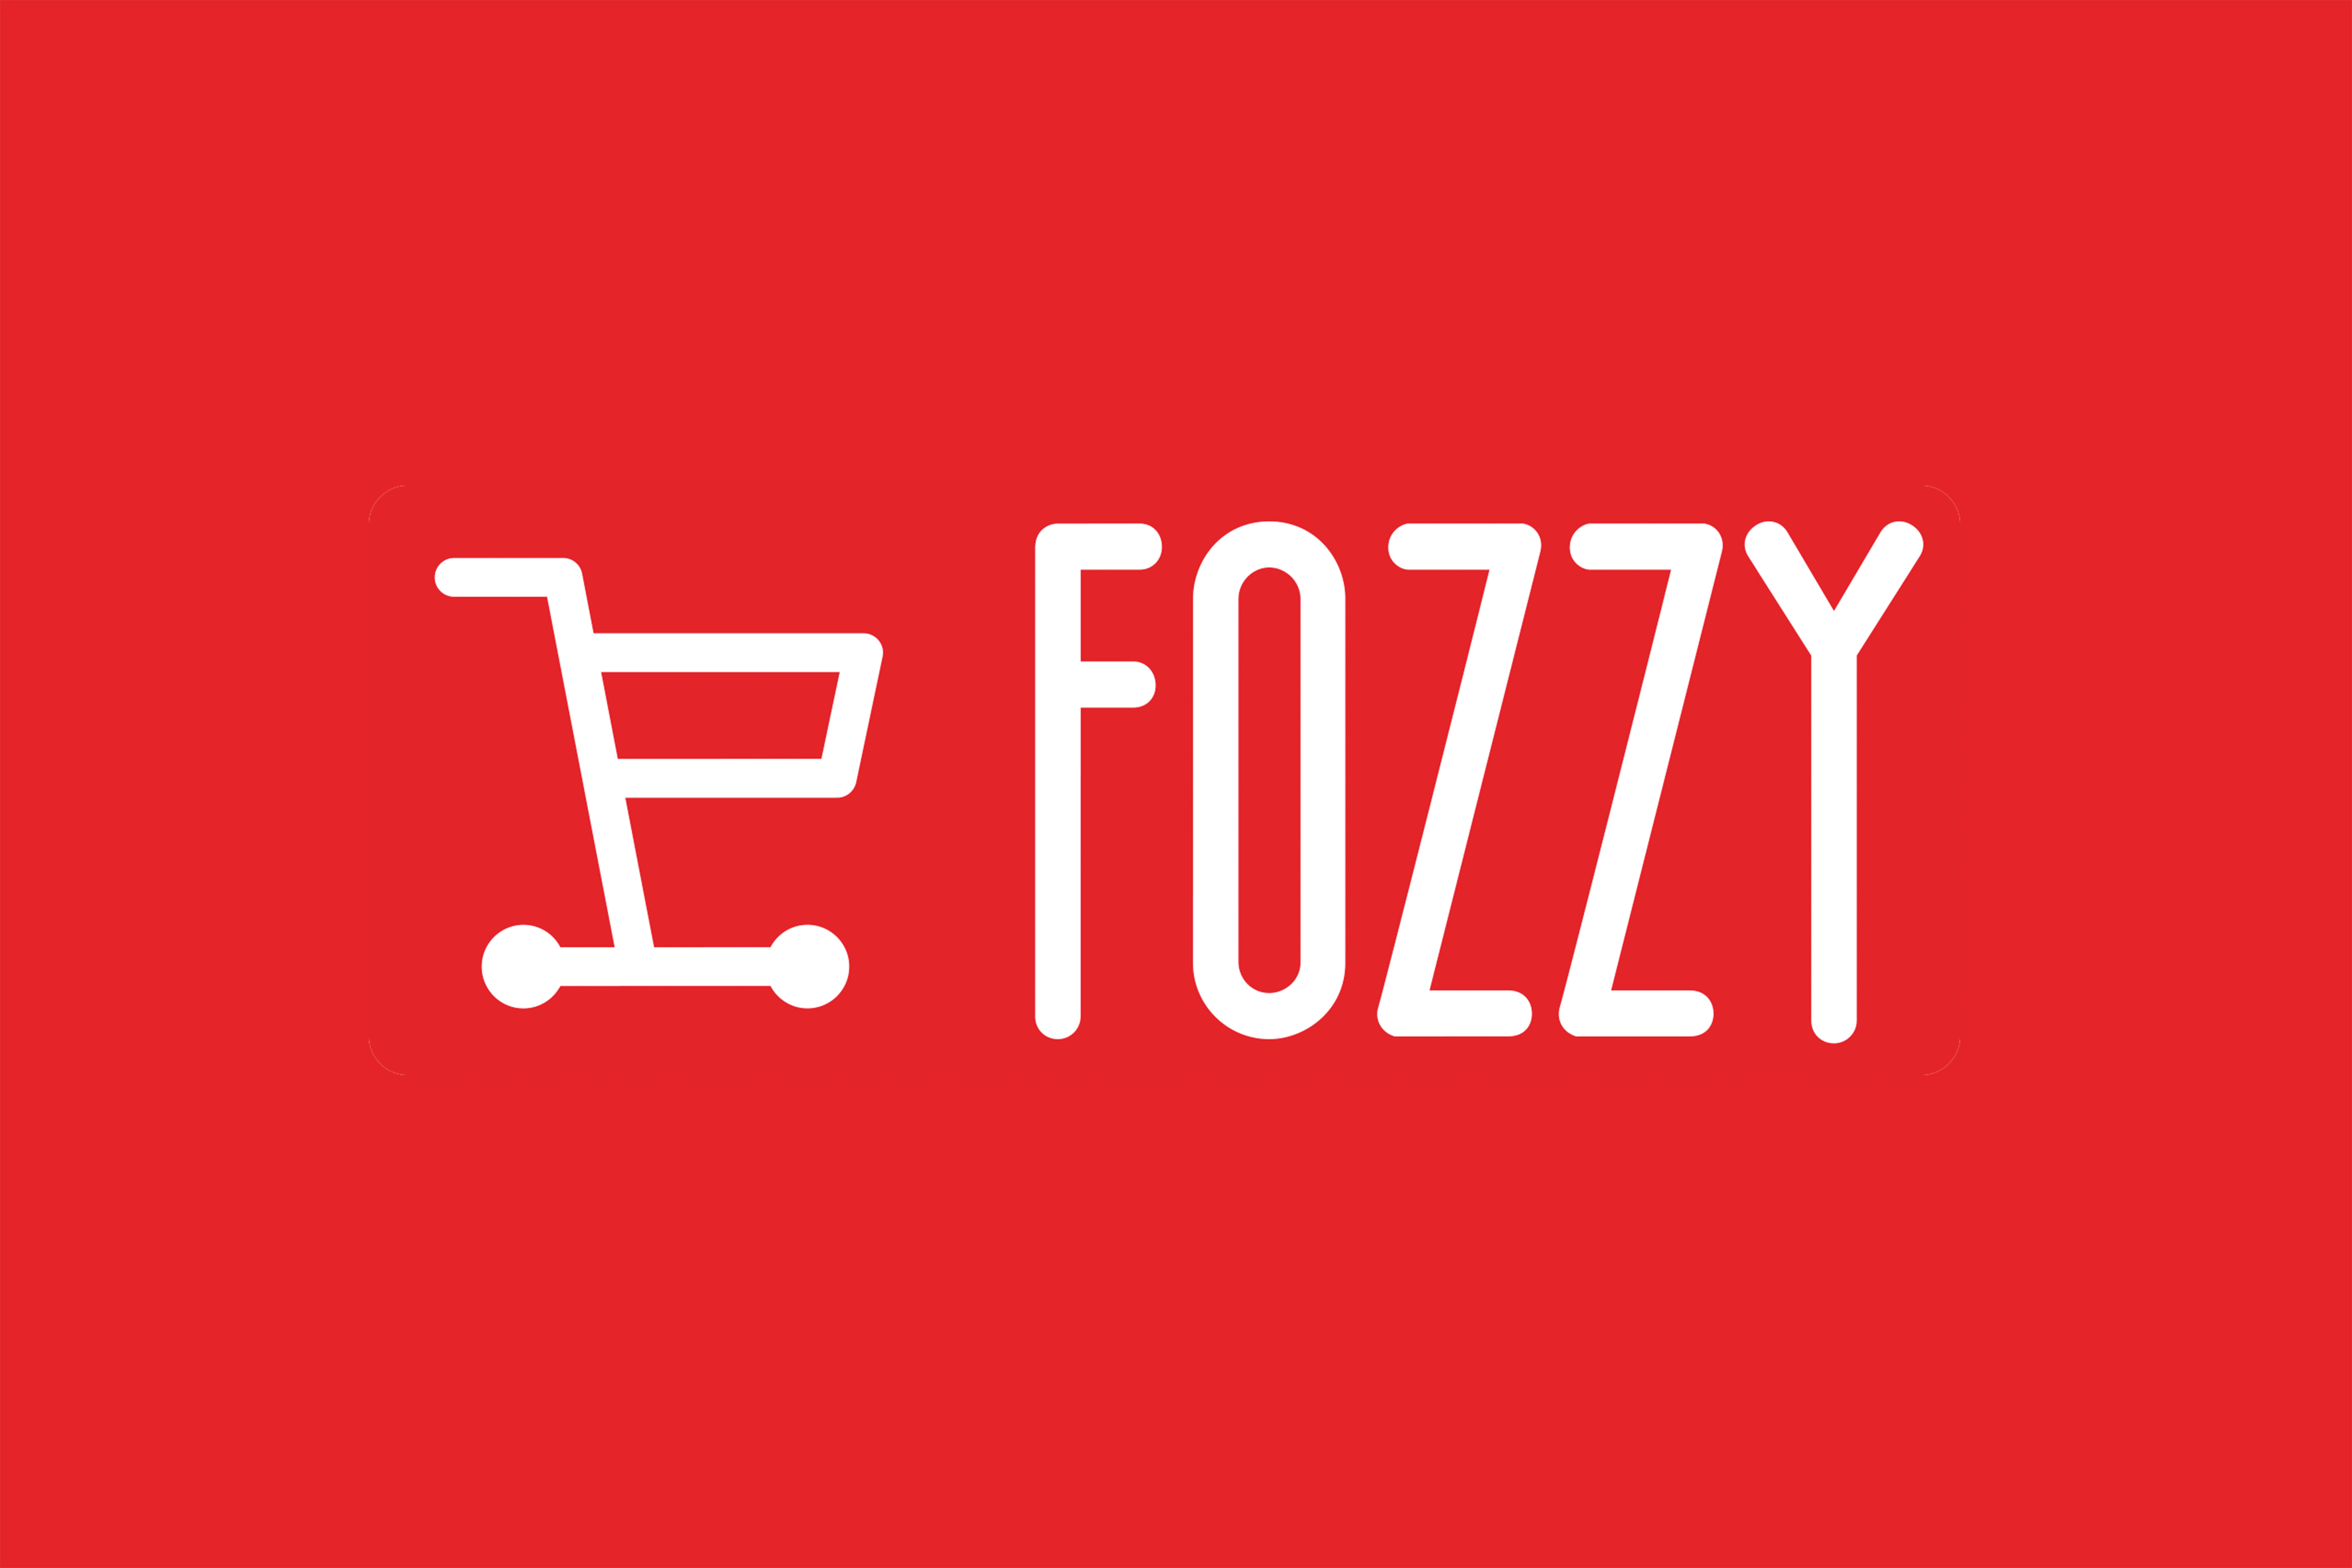 FOZZY Cash&Carry